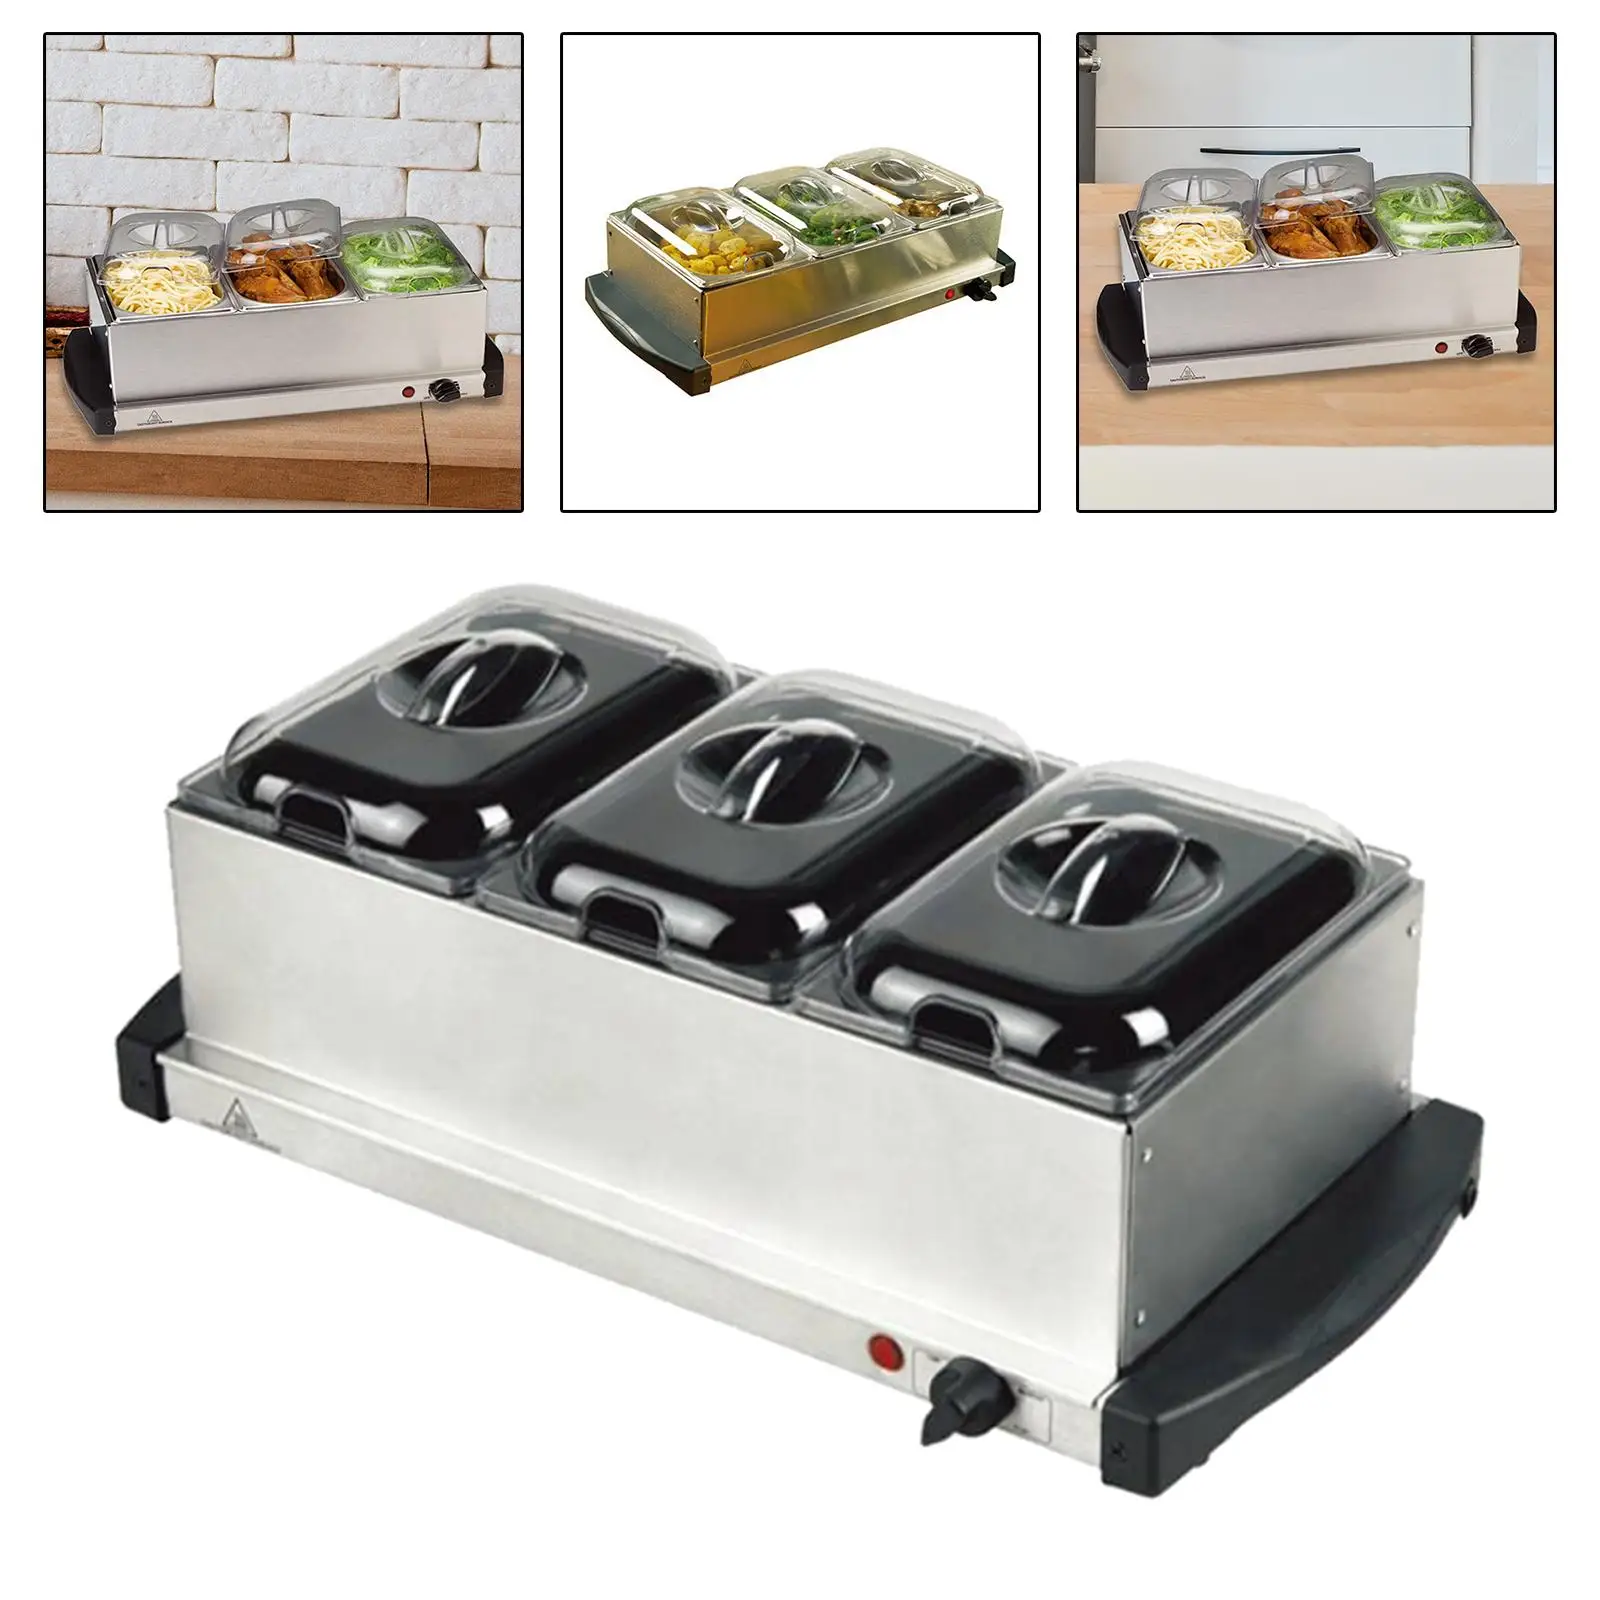 https://ae01.alicdn.com/kf/S99748176185241f5a9408212a810faf1N/3x1L-Electric-Buffet-Server-Tray-Chafer-Heating-Tray-Food-Warmer-Tray-for-Holidays-Catering.jpg